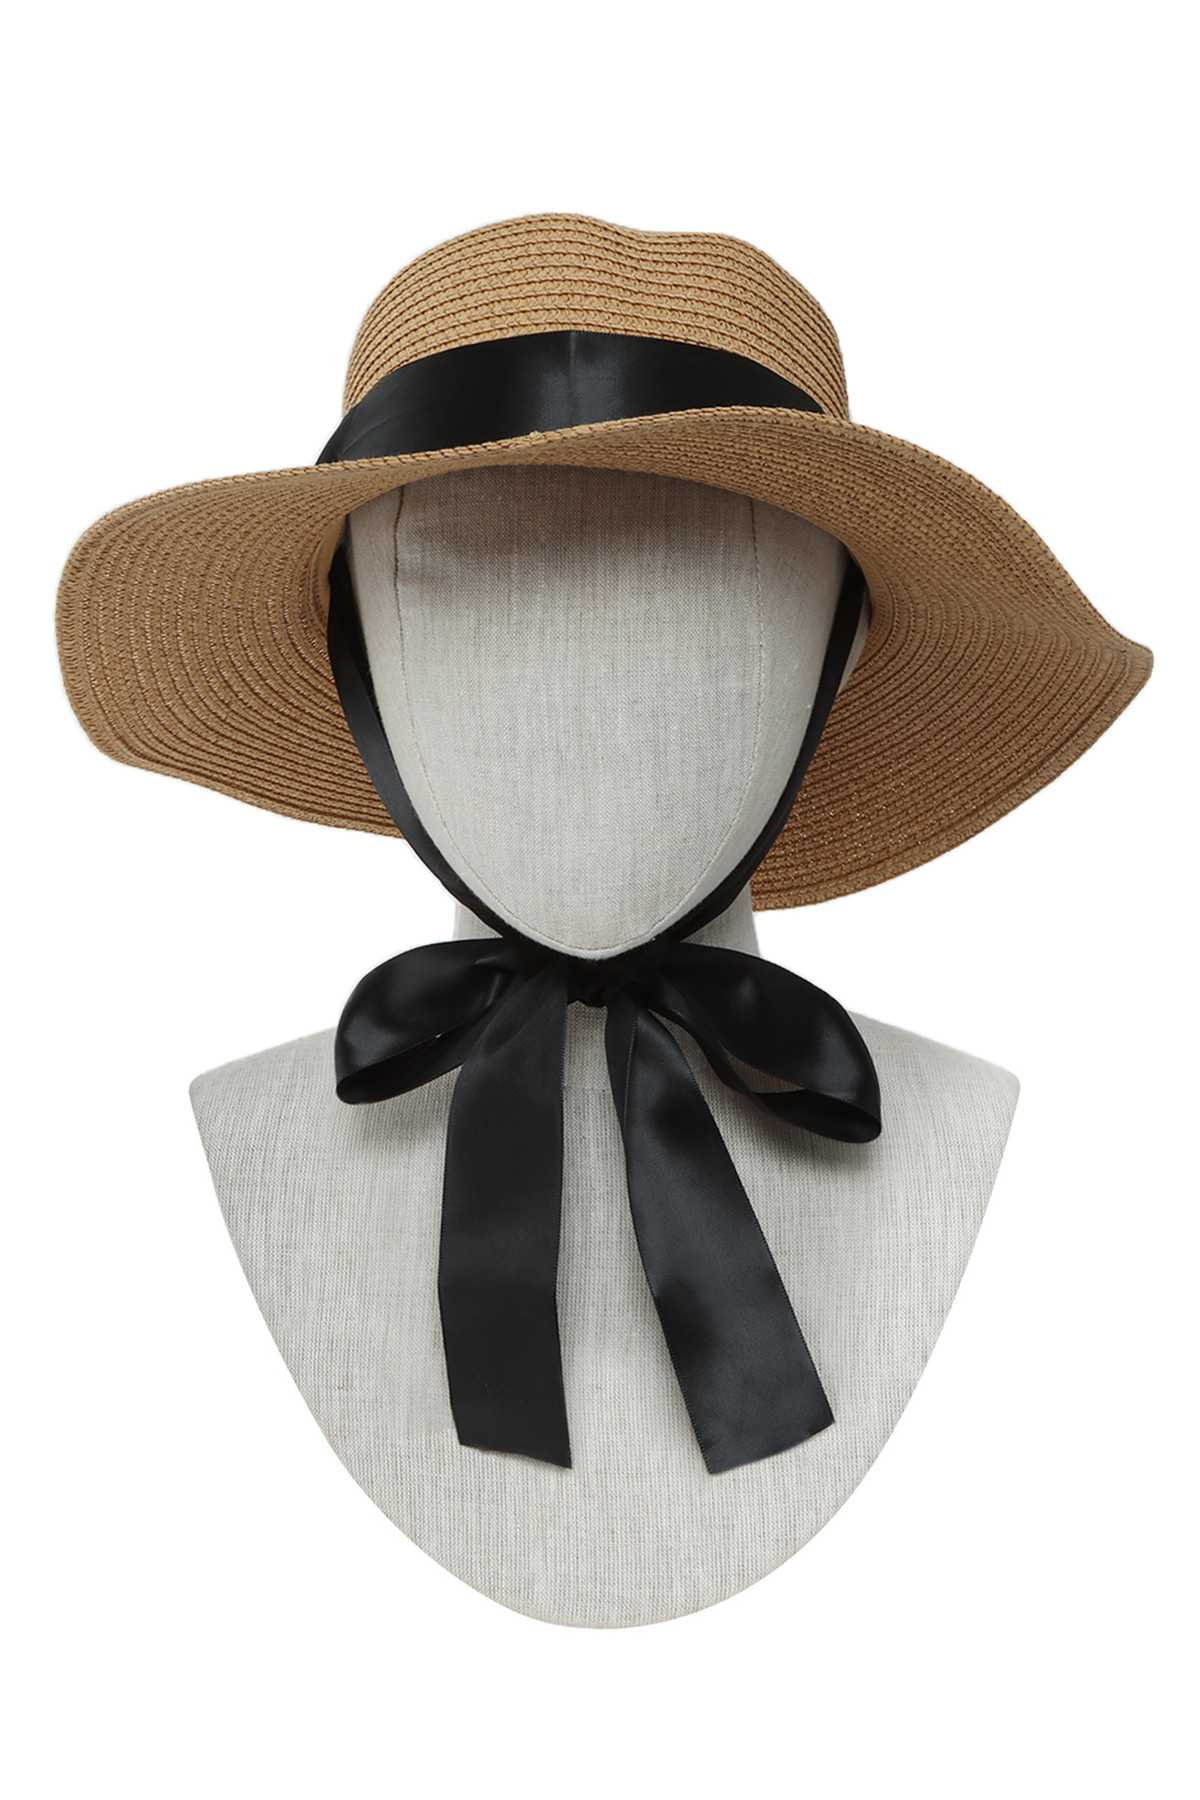 FLAT TOP STRAW HAT WITH SATIN TIE